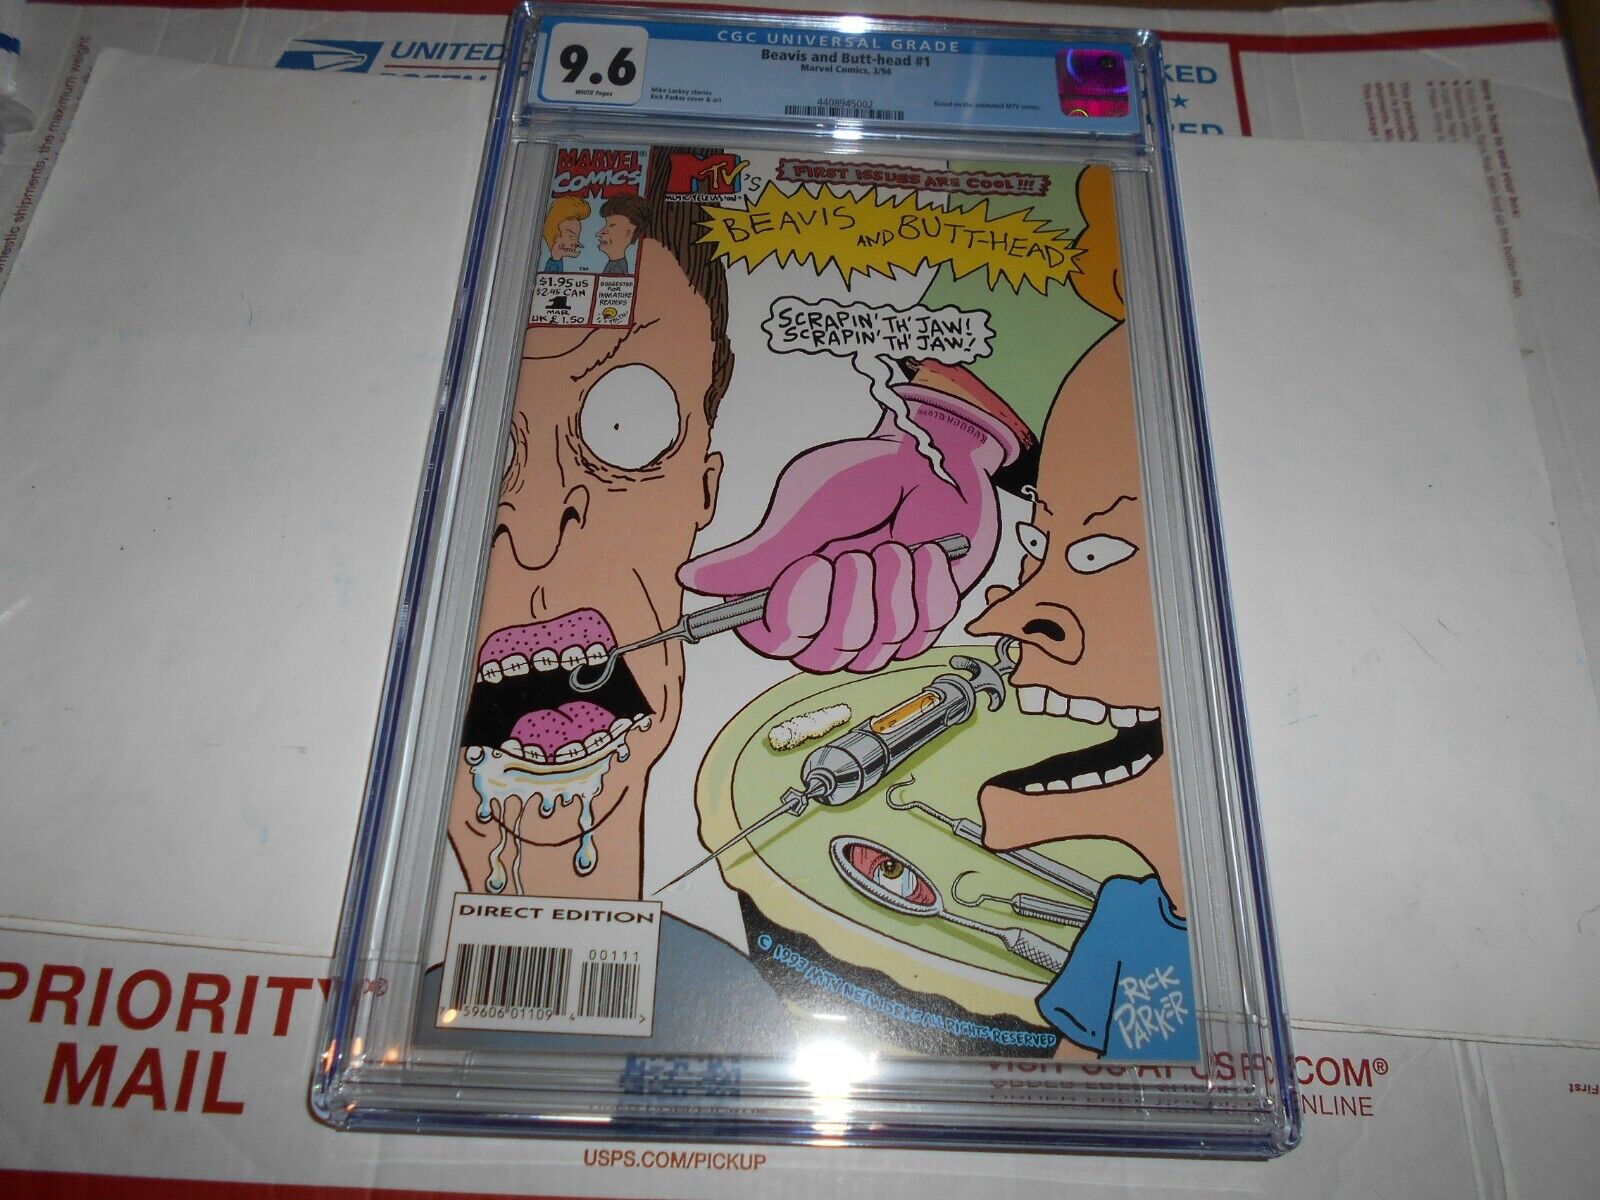 BEAVIS AND BUTTHEAD #1 CGC 9.6 (COMBINED SHIPPING AVAILABLE)